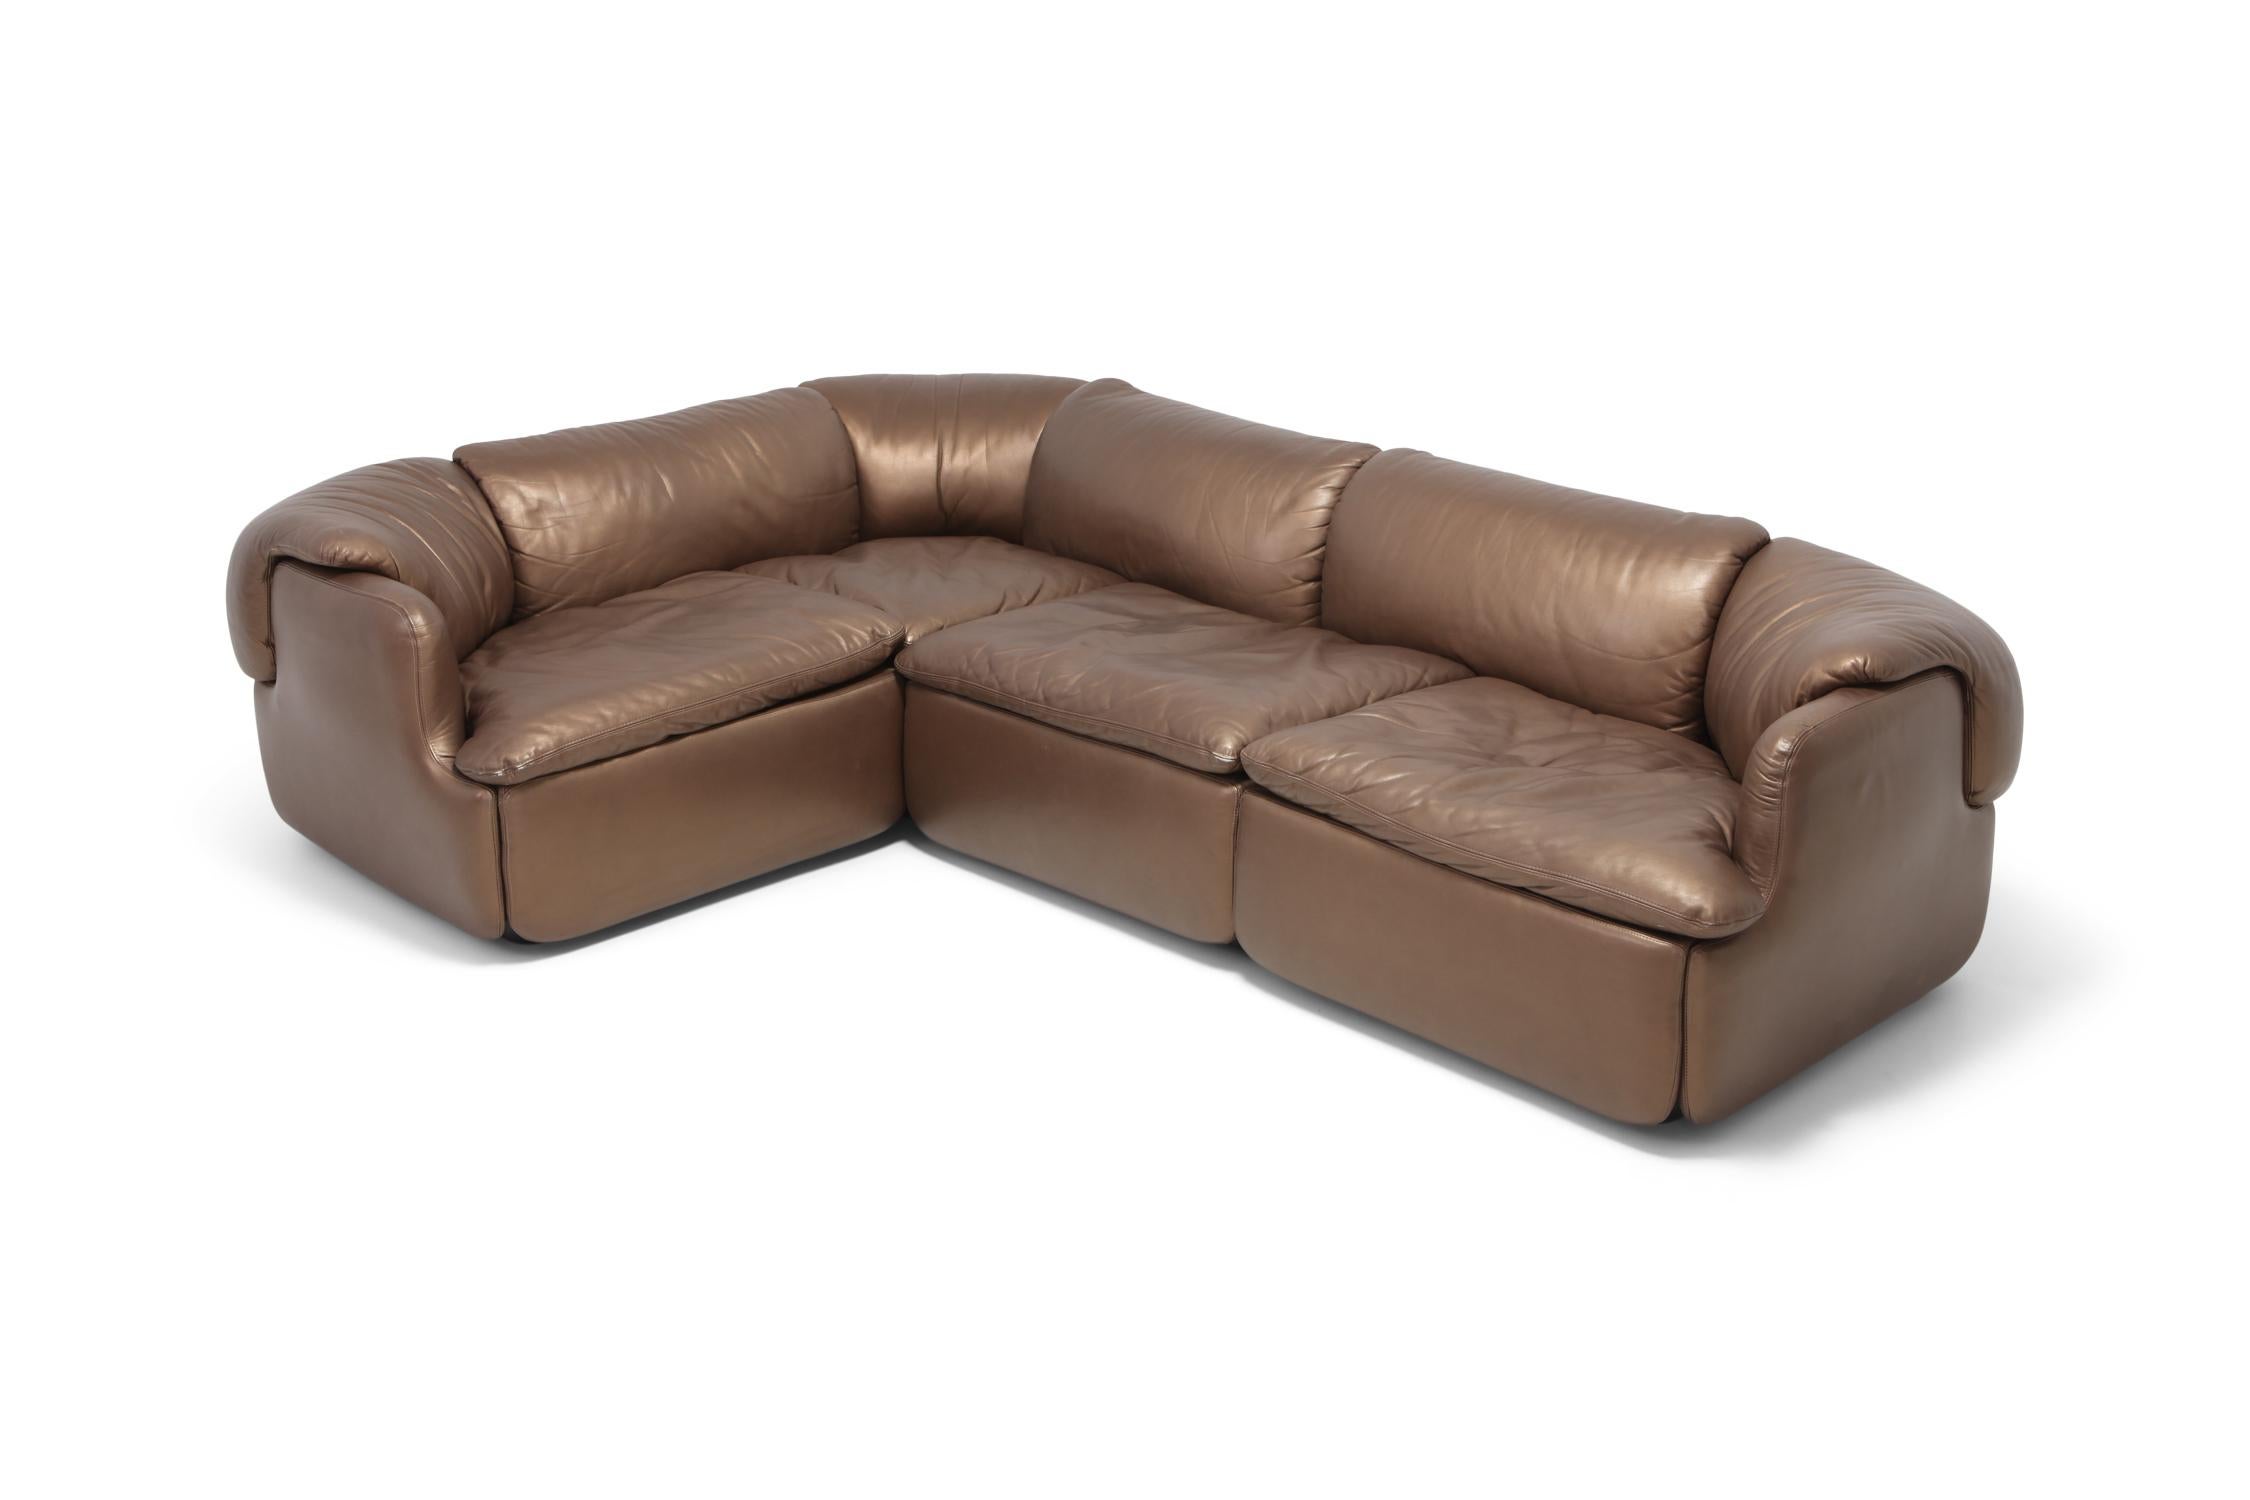 Bronze Leather Saporiti High-End Sectional Sofa 'Confidential' 5